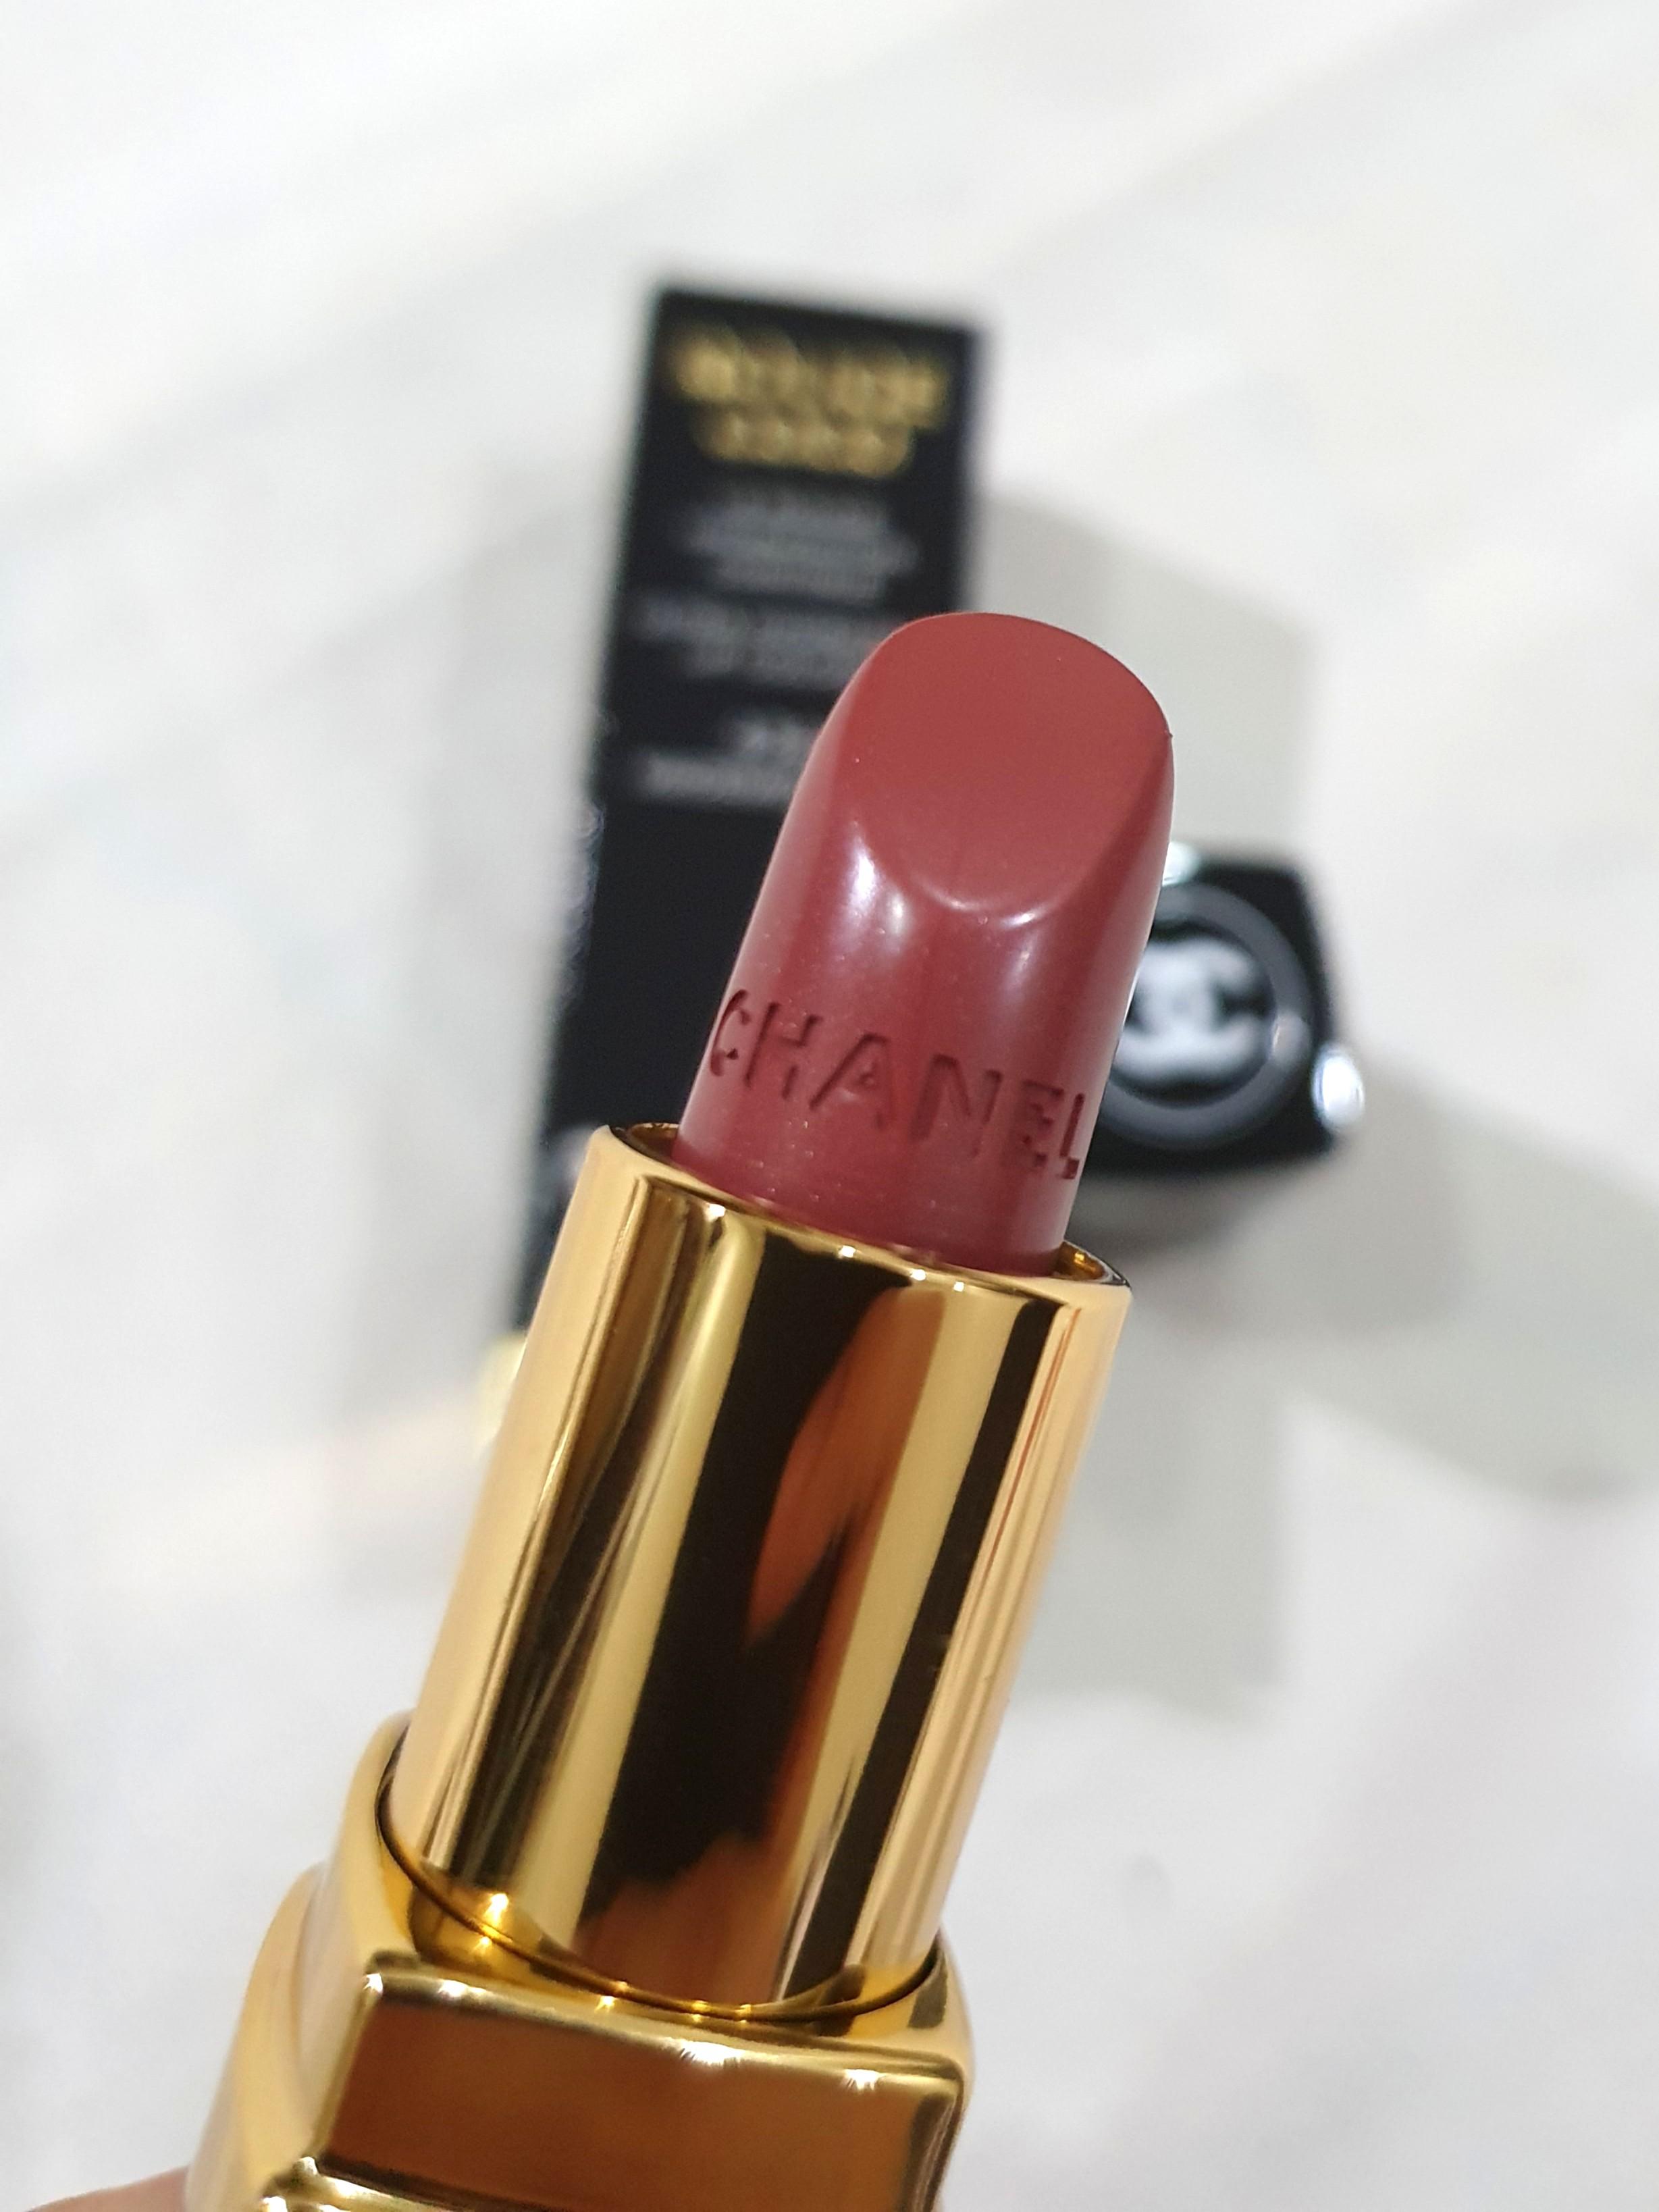 CHANEL Authentic, Rouge Coco 434 Mademoiselle Lipstick, Beauty